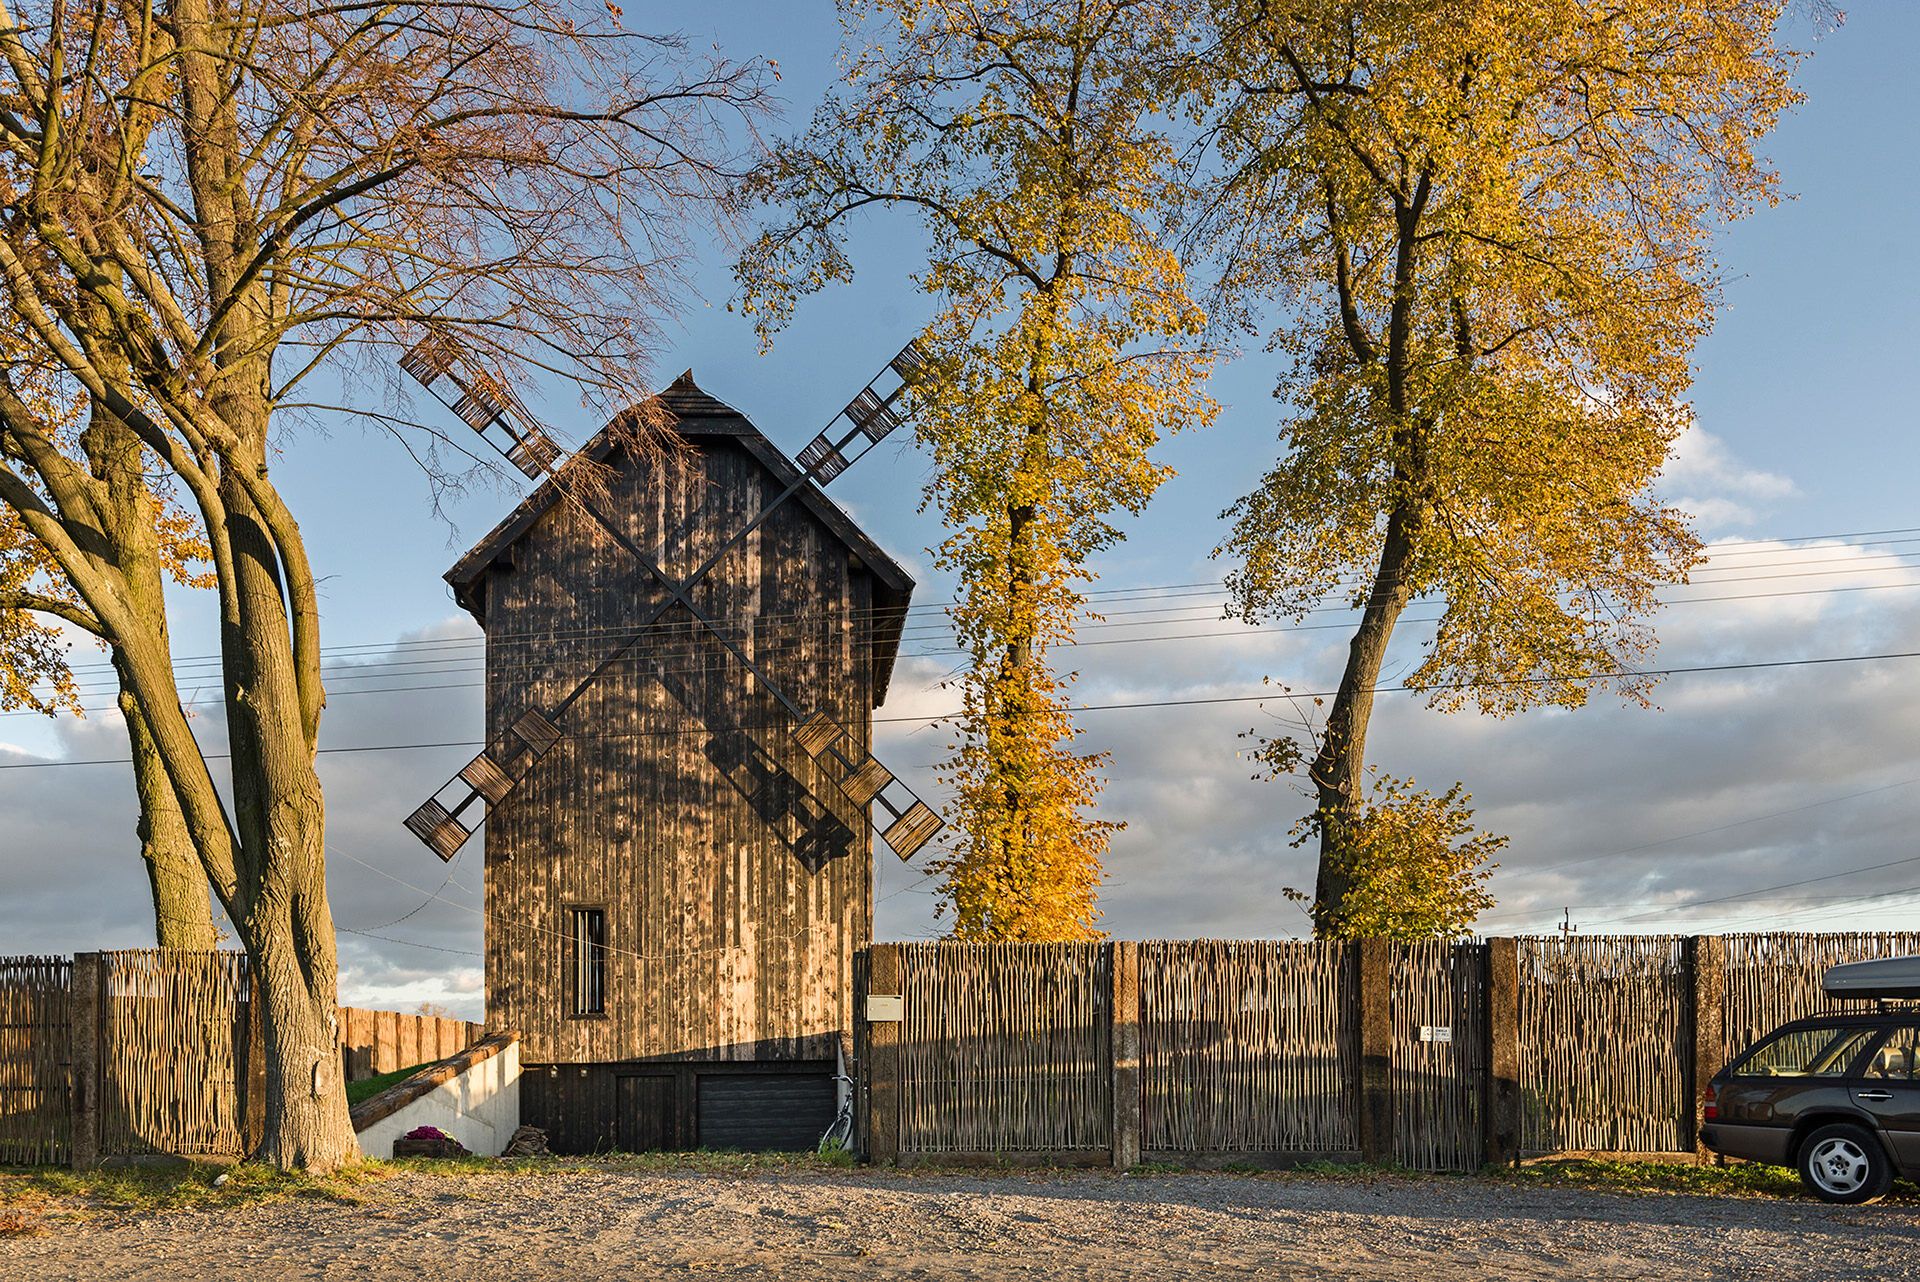 An old windmill was remodeled into a residential house in Poland